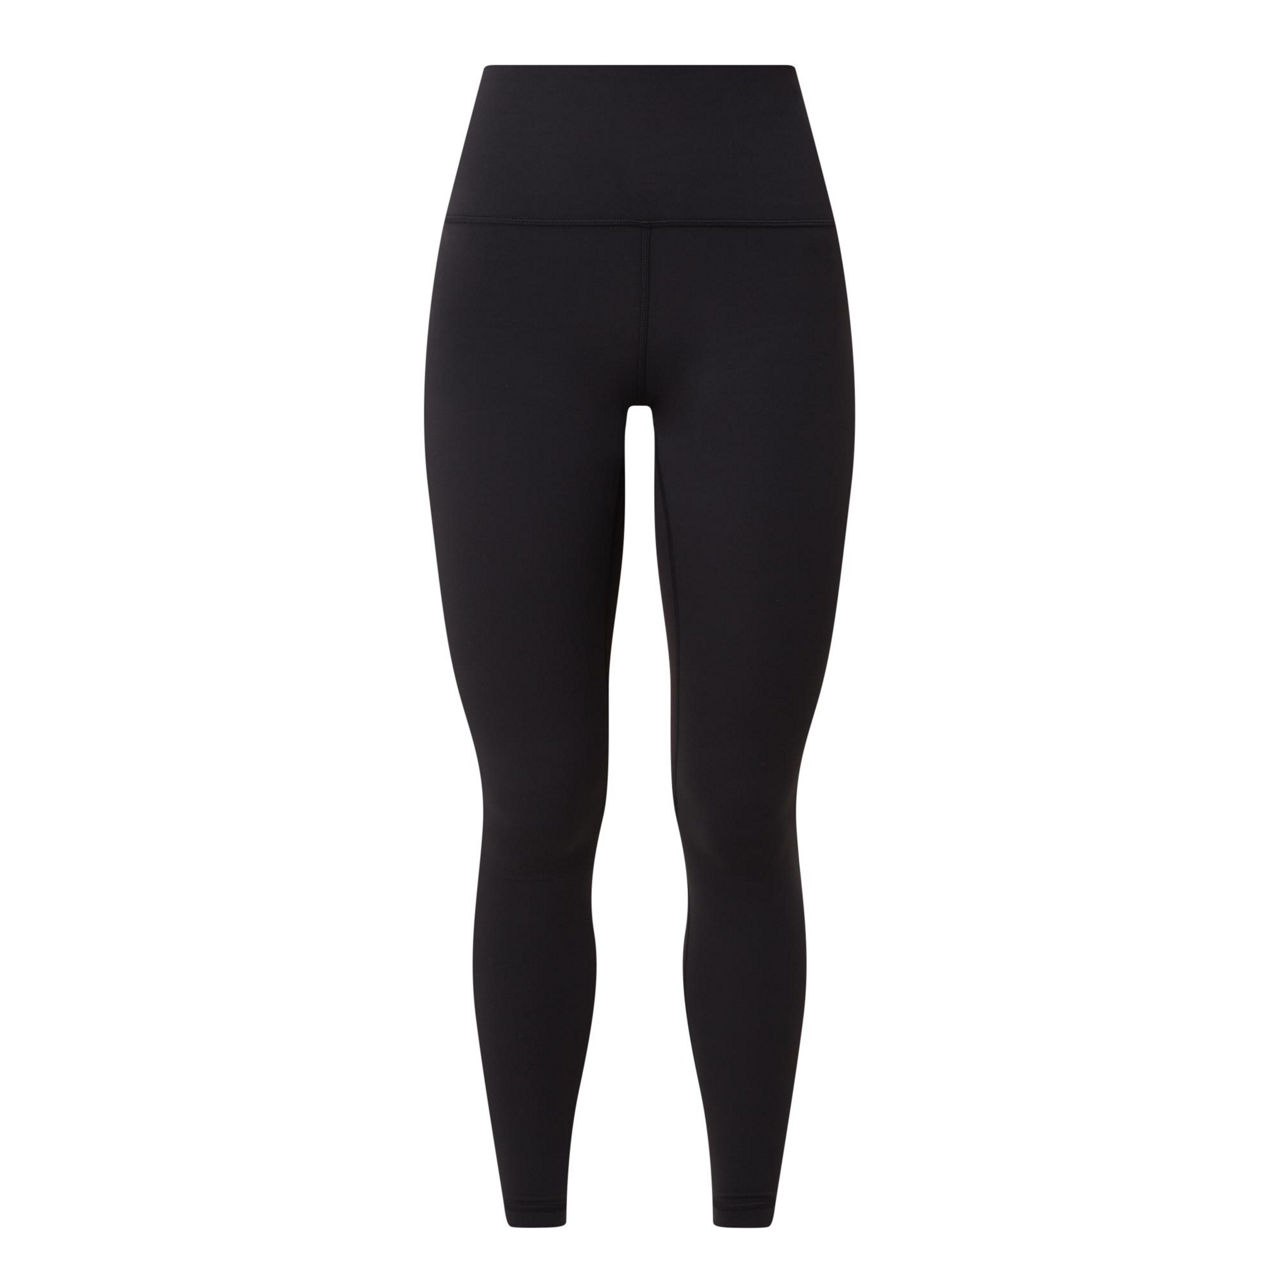 Lululemon Black/Brick Camo Mapped Out High Rise Tight 28 Leggings - Size 6